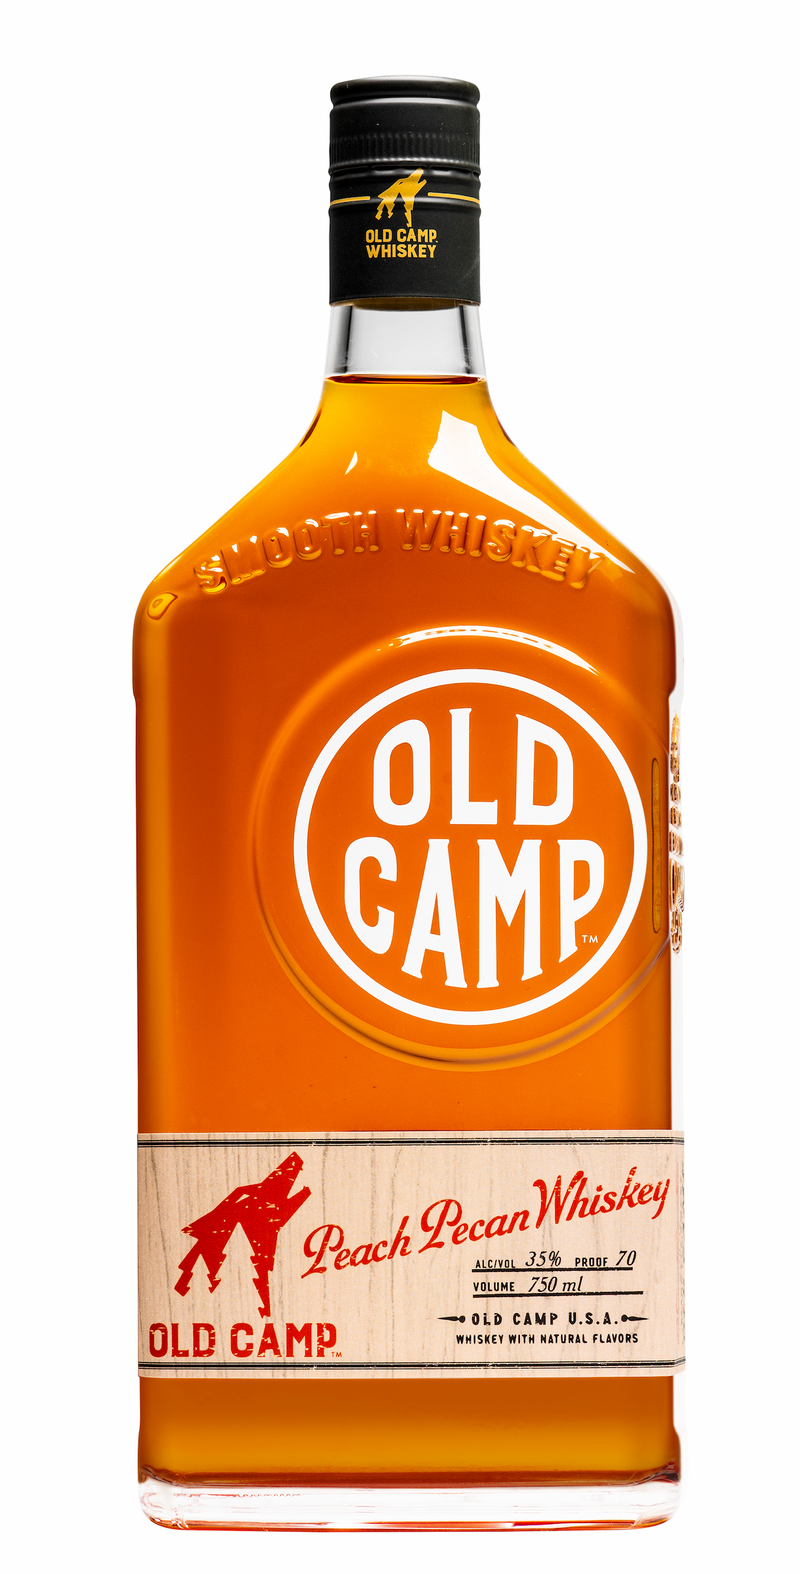 OLD CAMP PEACH PECAN WHISKEY